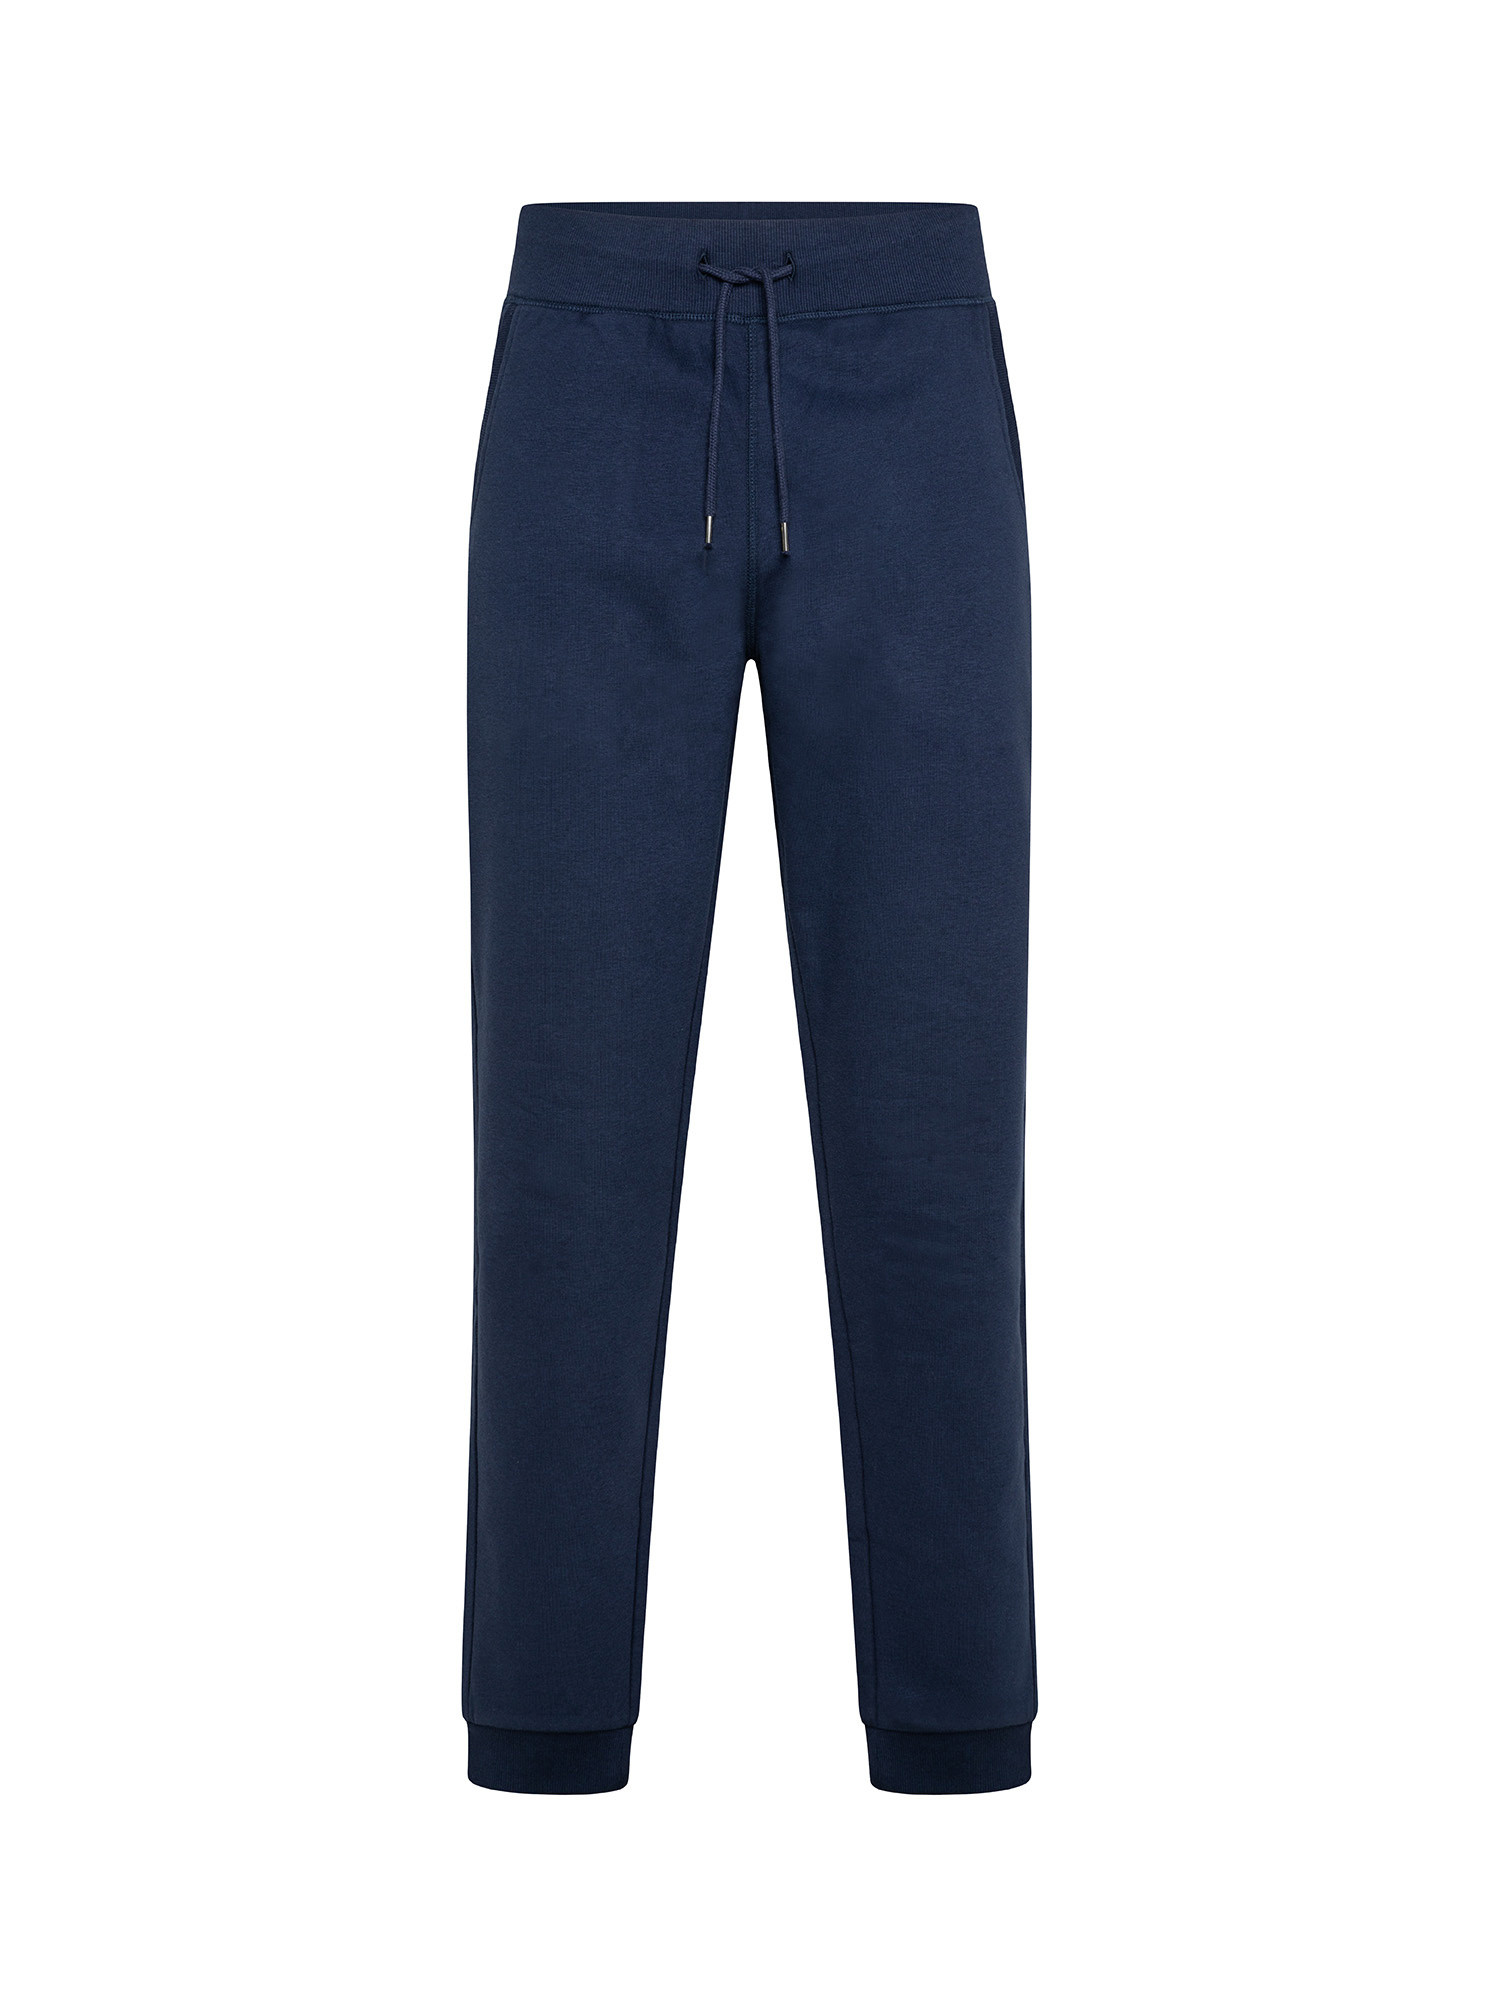 JCT - Soft touch five-pocket trousers, Blue, large image number 0